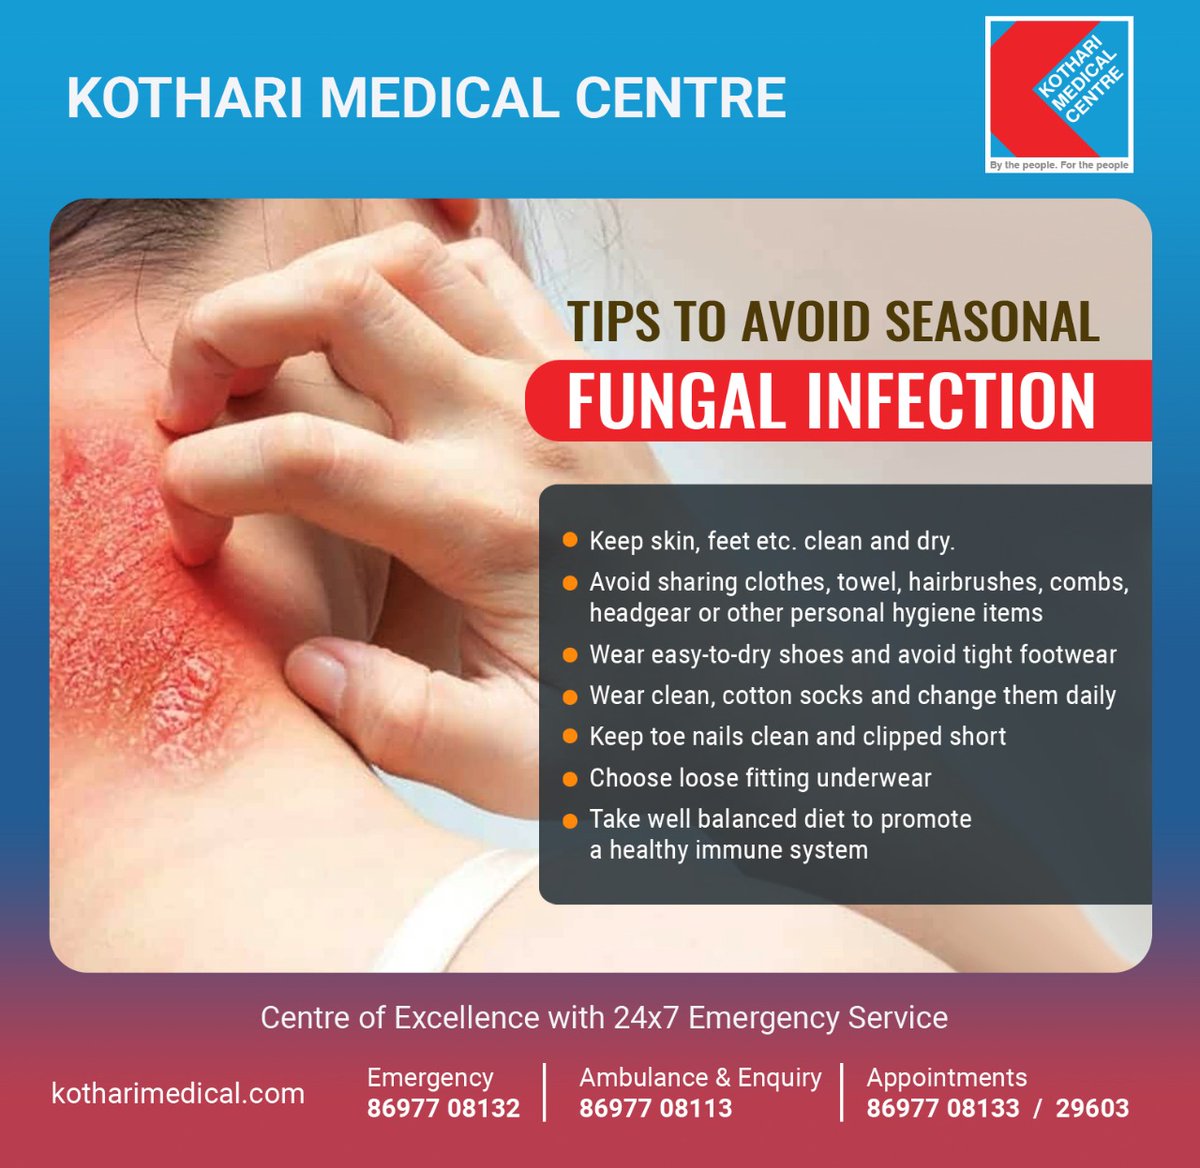 Prevent fungal infections from taking a foothold at home, your best defense is to keep skin clean and dry and follow this simple tips to avoid seasonal fungal infection.
#fungalinfection #preventinfection #healthcare #hospital #Indianmedicalassociation #Kotharimedical #kolkata